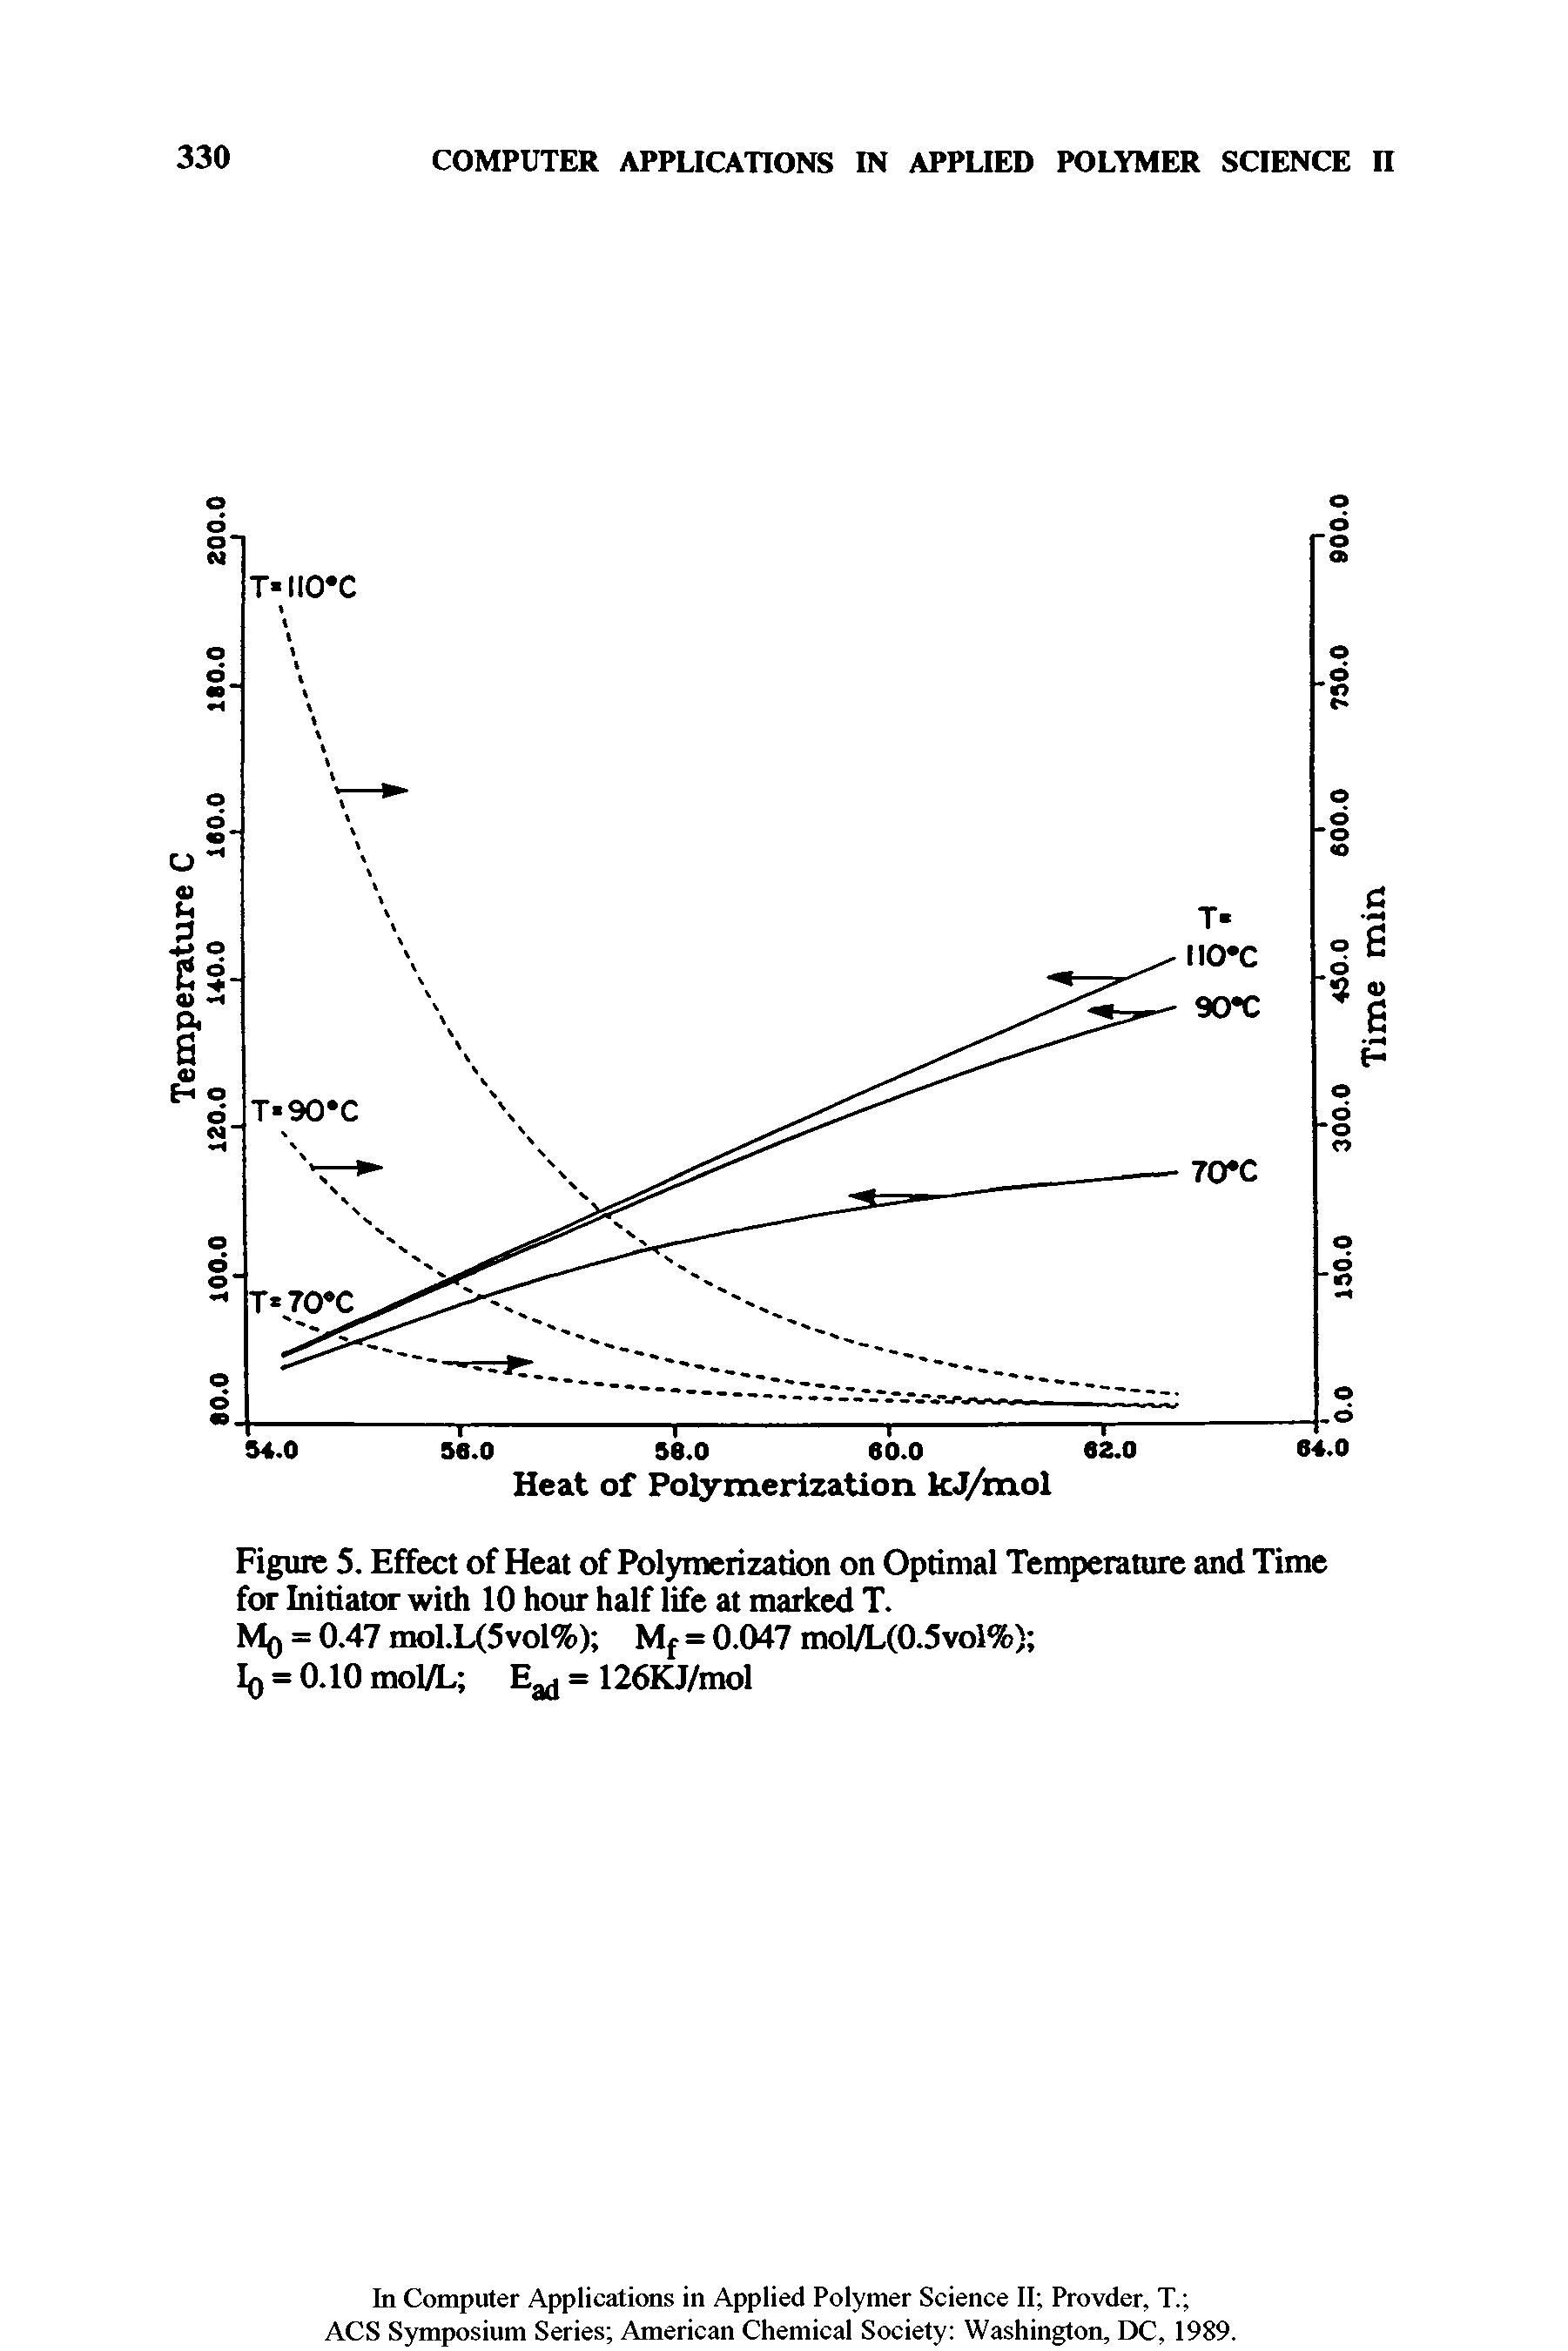 Figure 5. Effect of Heat of Polymerization on Optimal Temperature and Time for Initiator with 10 hour half life at marked T.